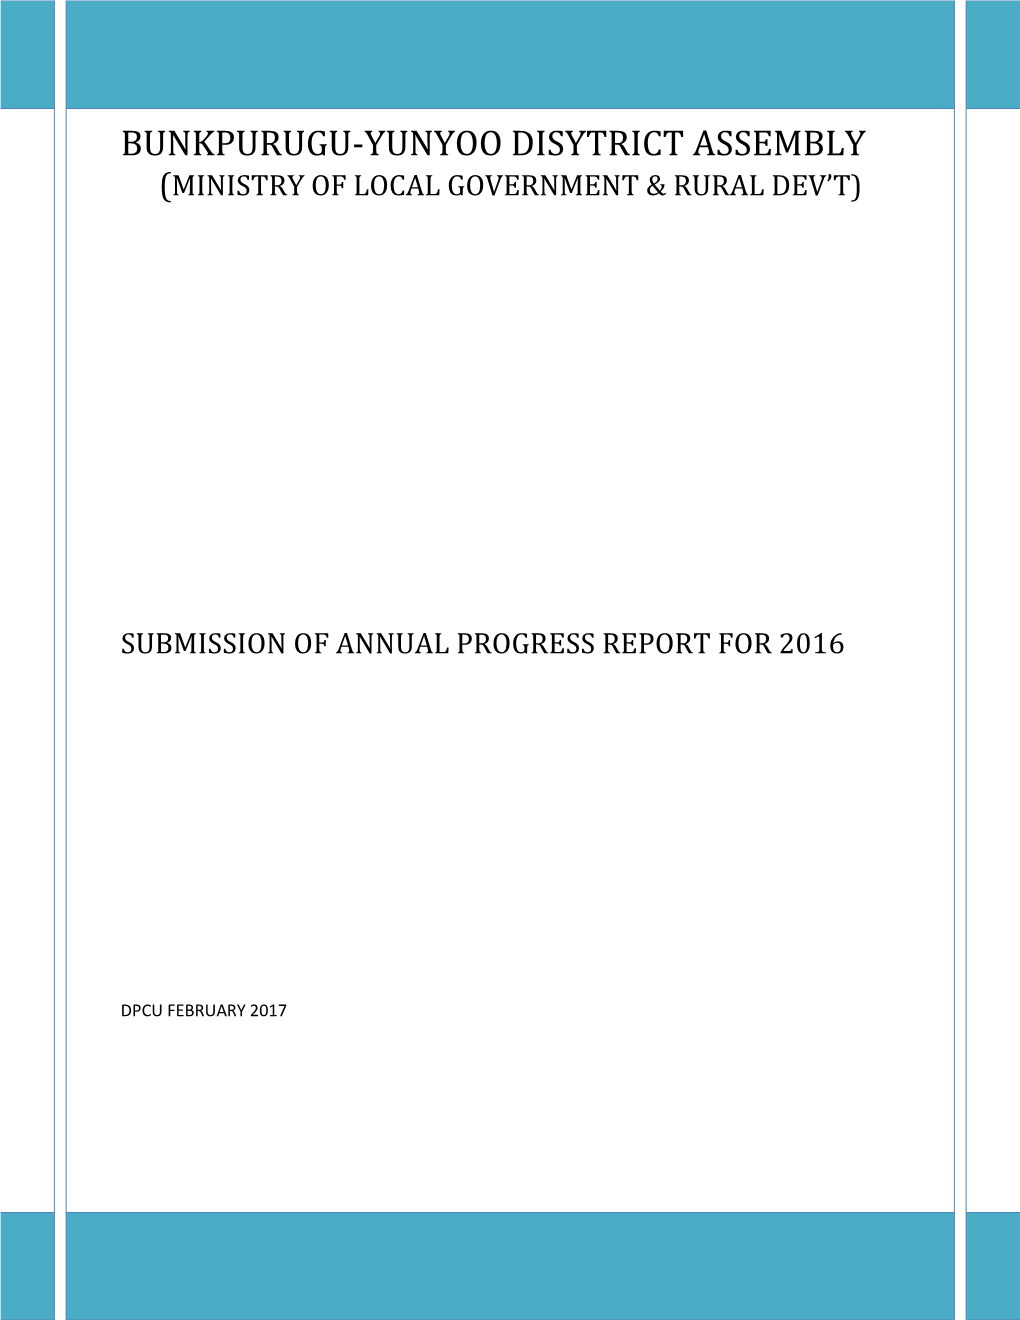 Submission of Annual Progress Report for 2016